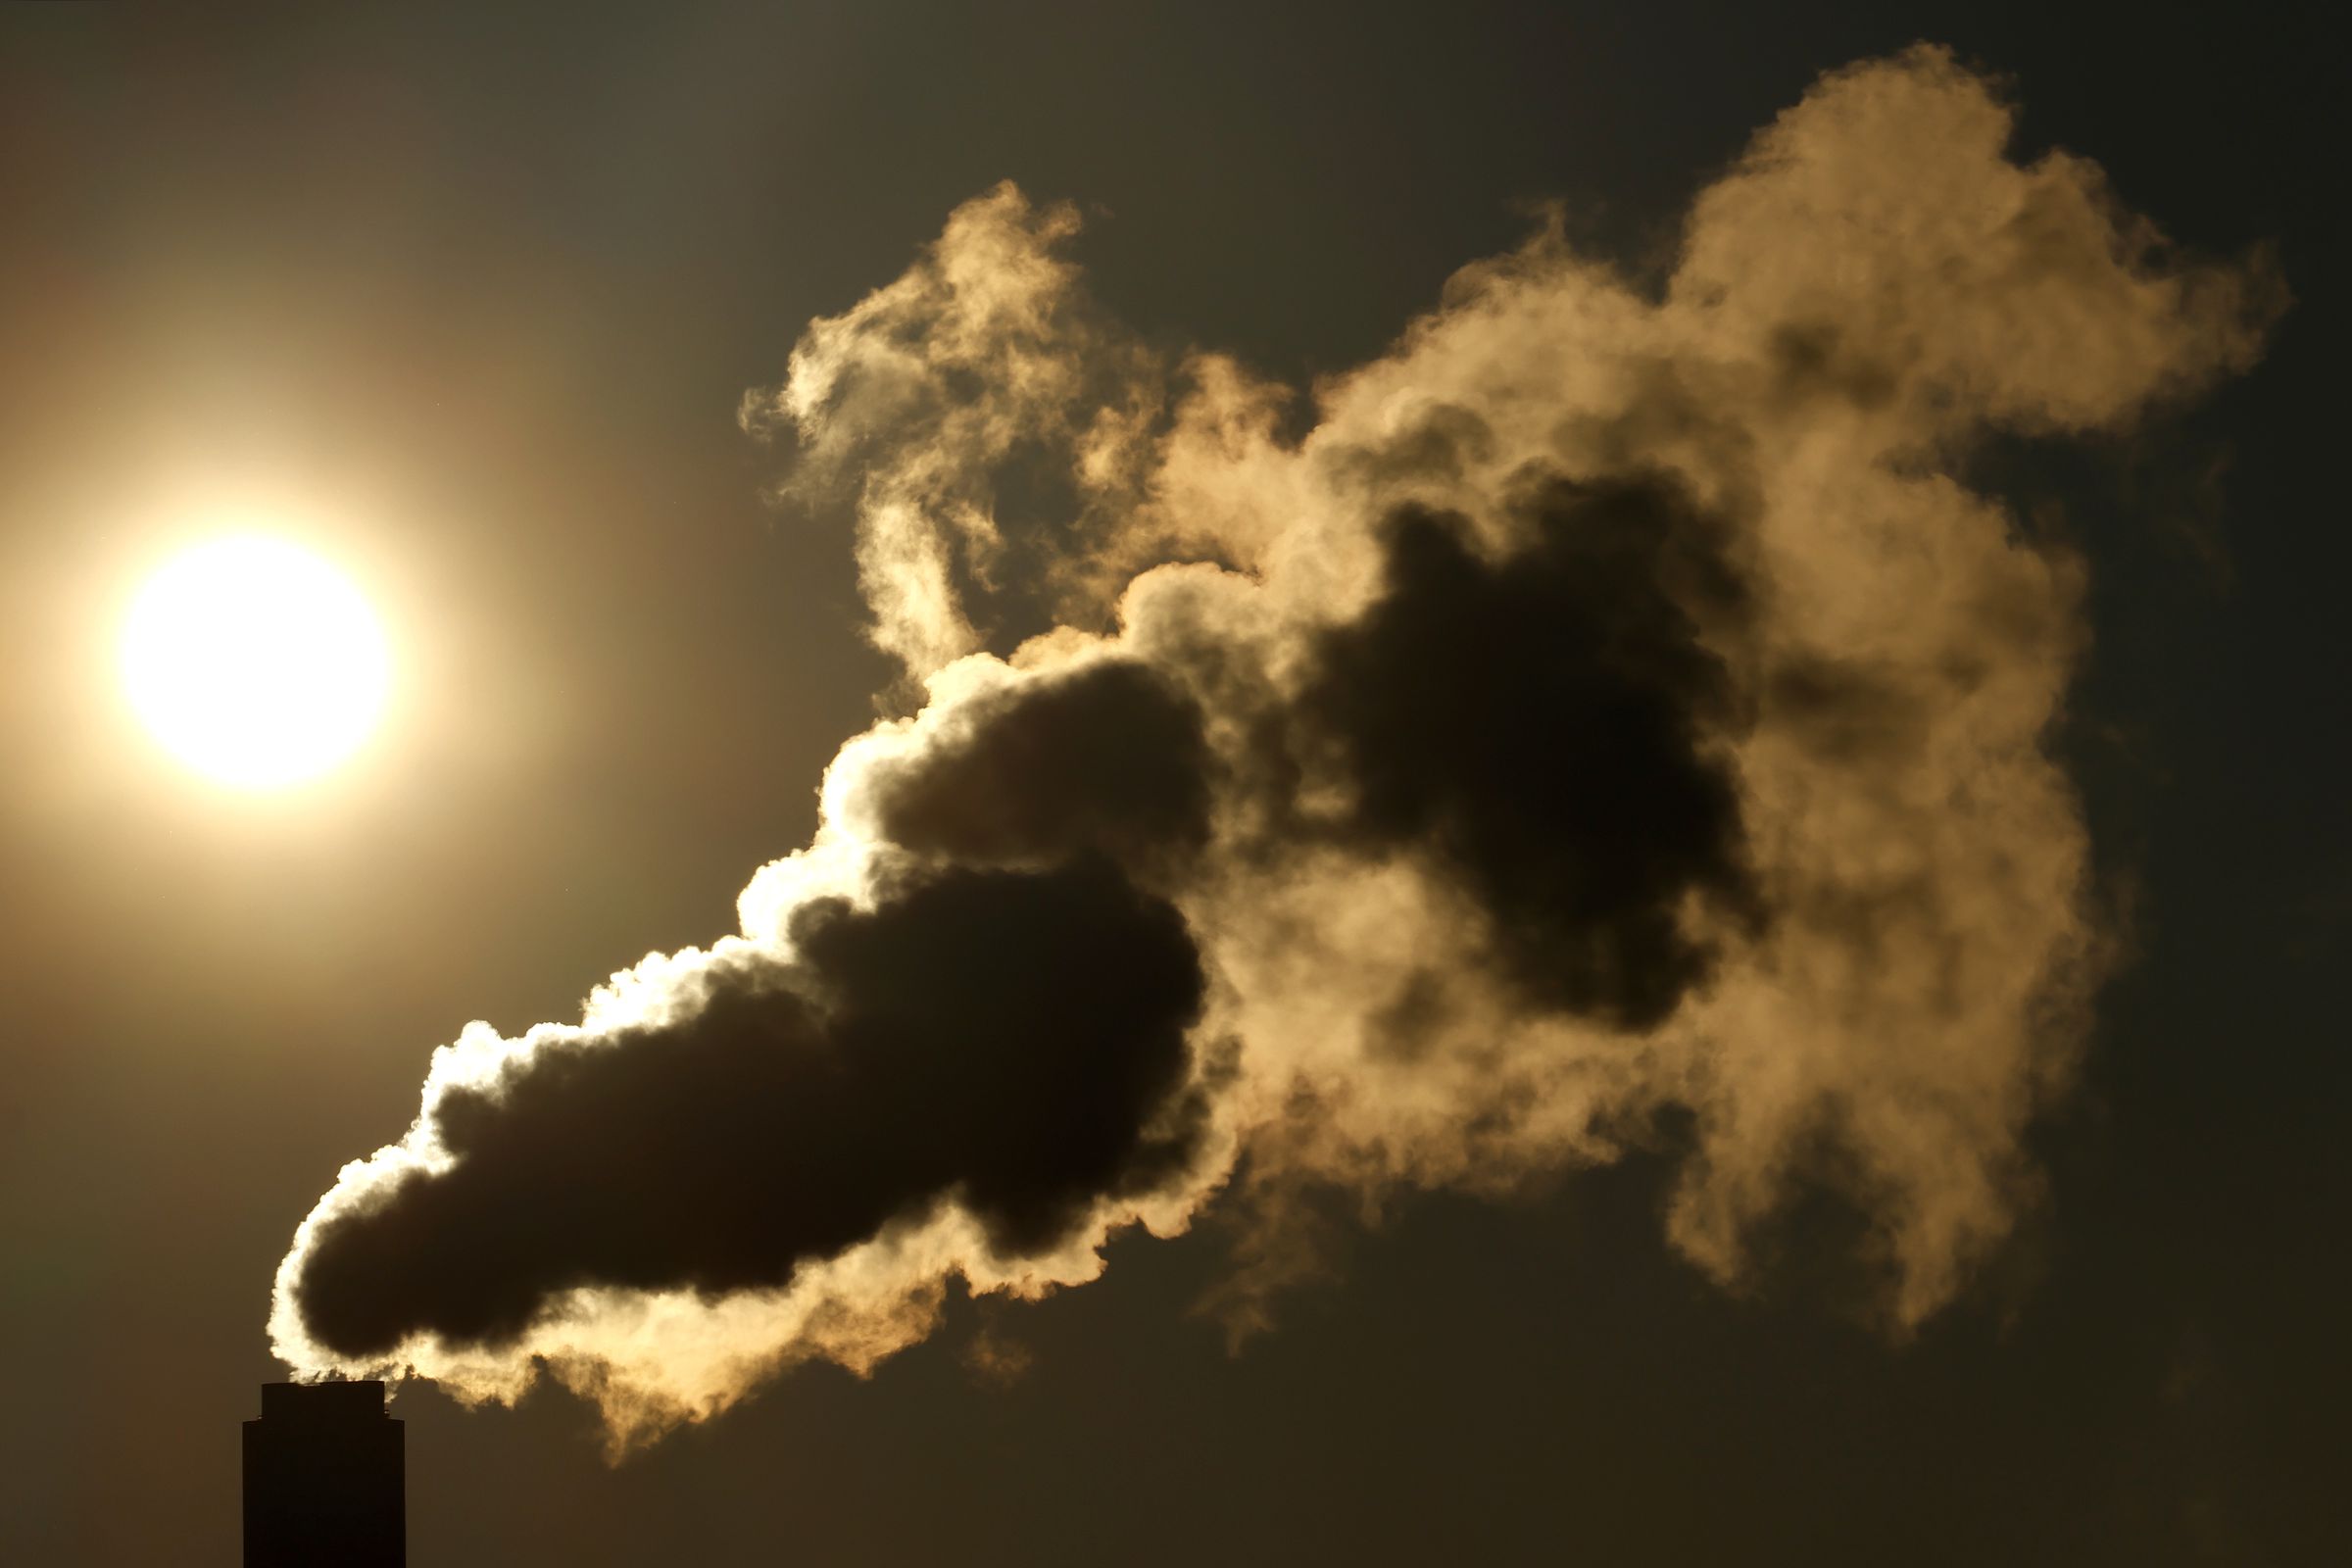 A plume of smoke rises from a smoke stack as the sun rises 